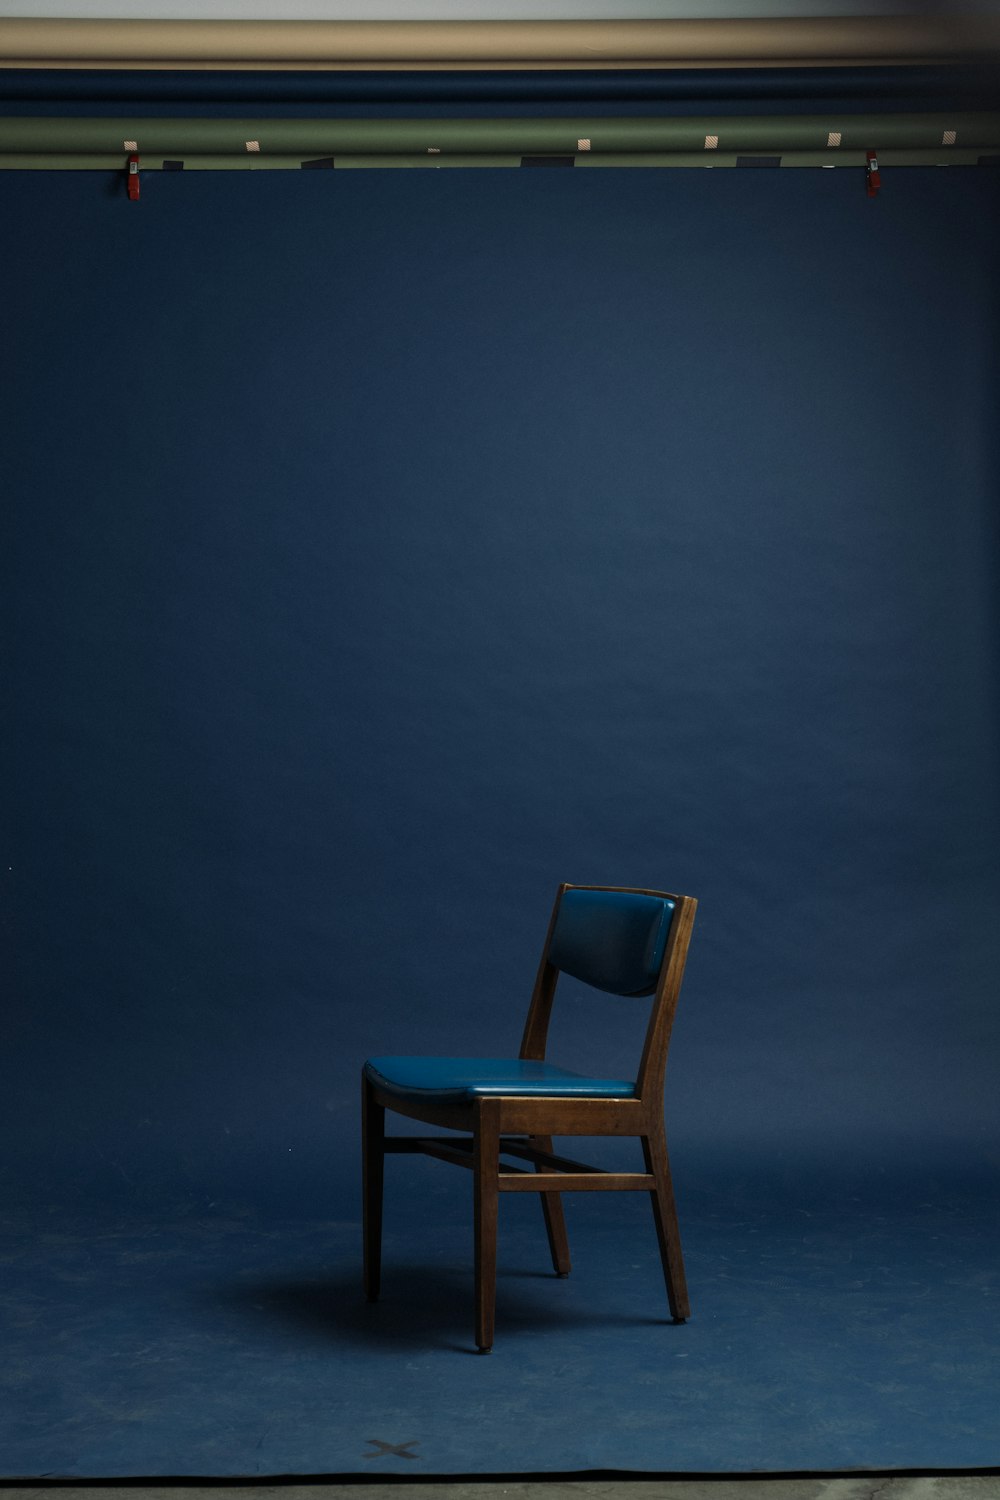 Blue Padded Brown Wooden Armless Chair Photo Free Chair Image On